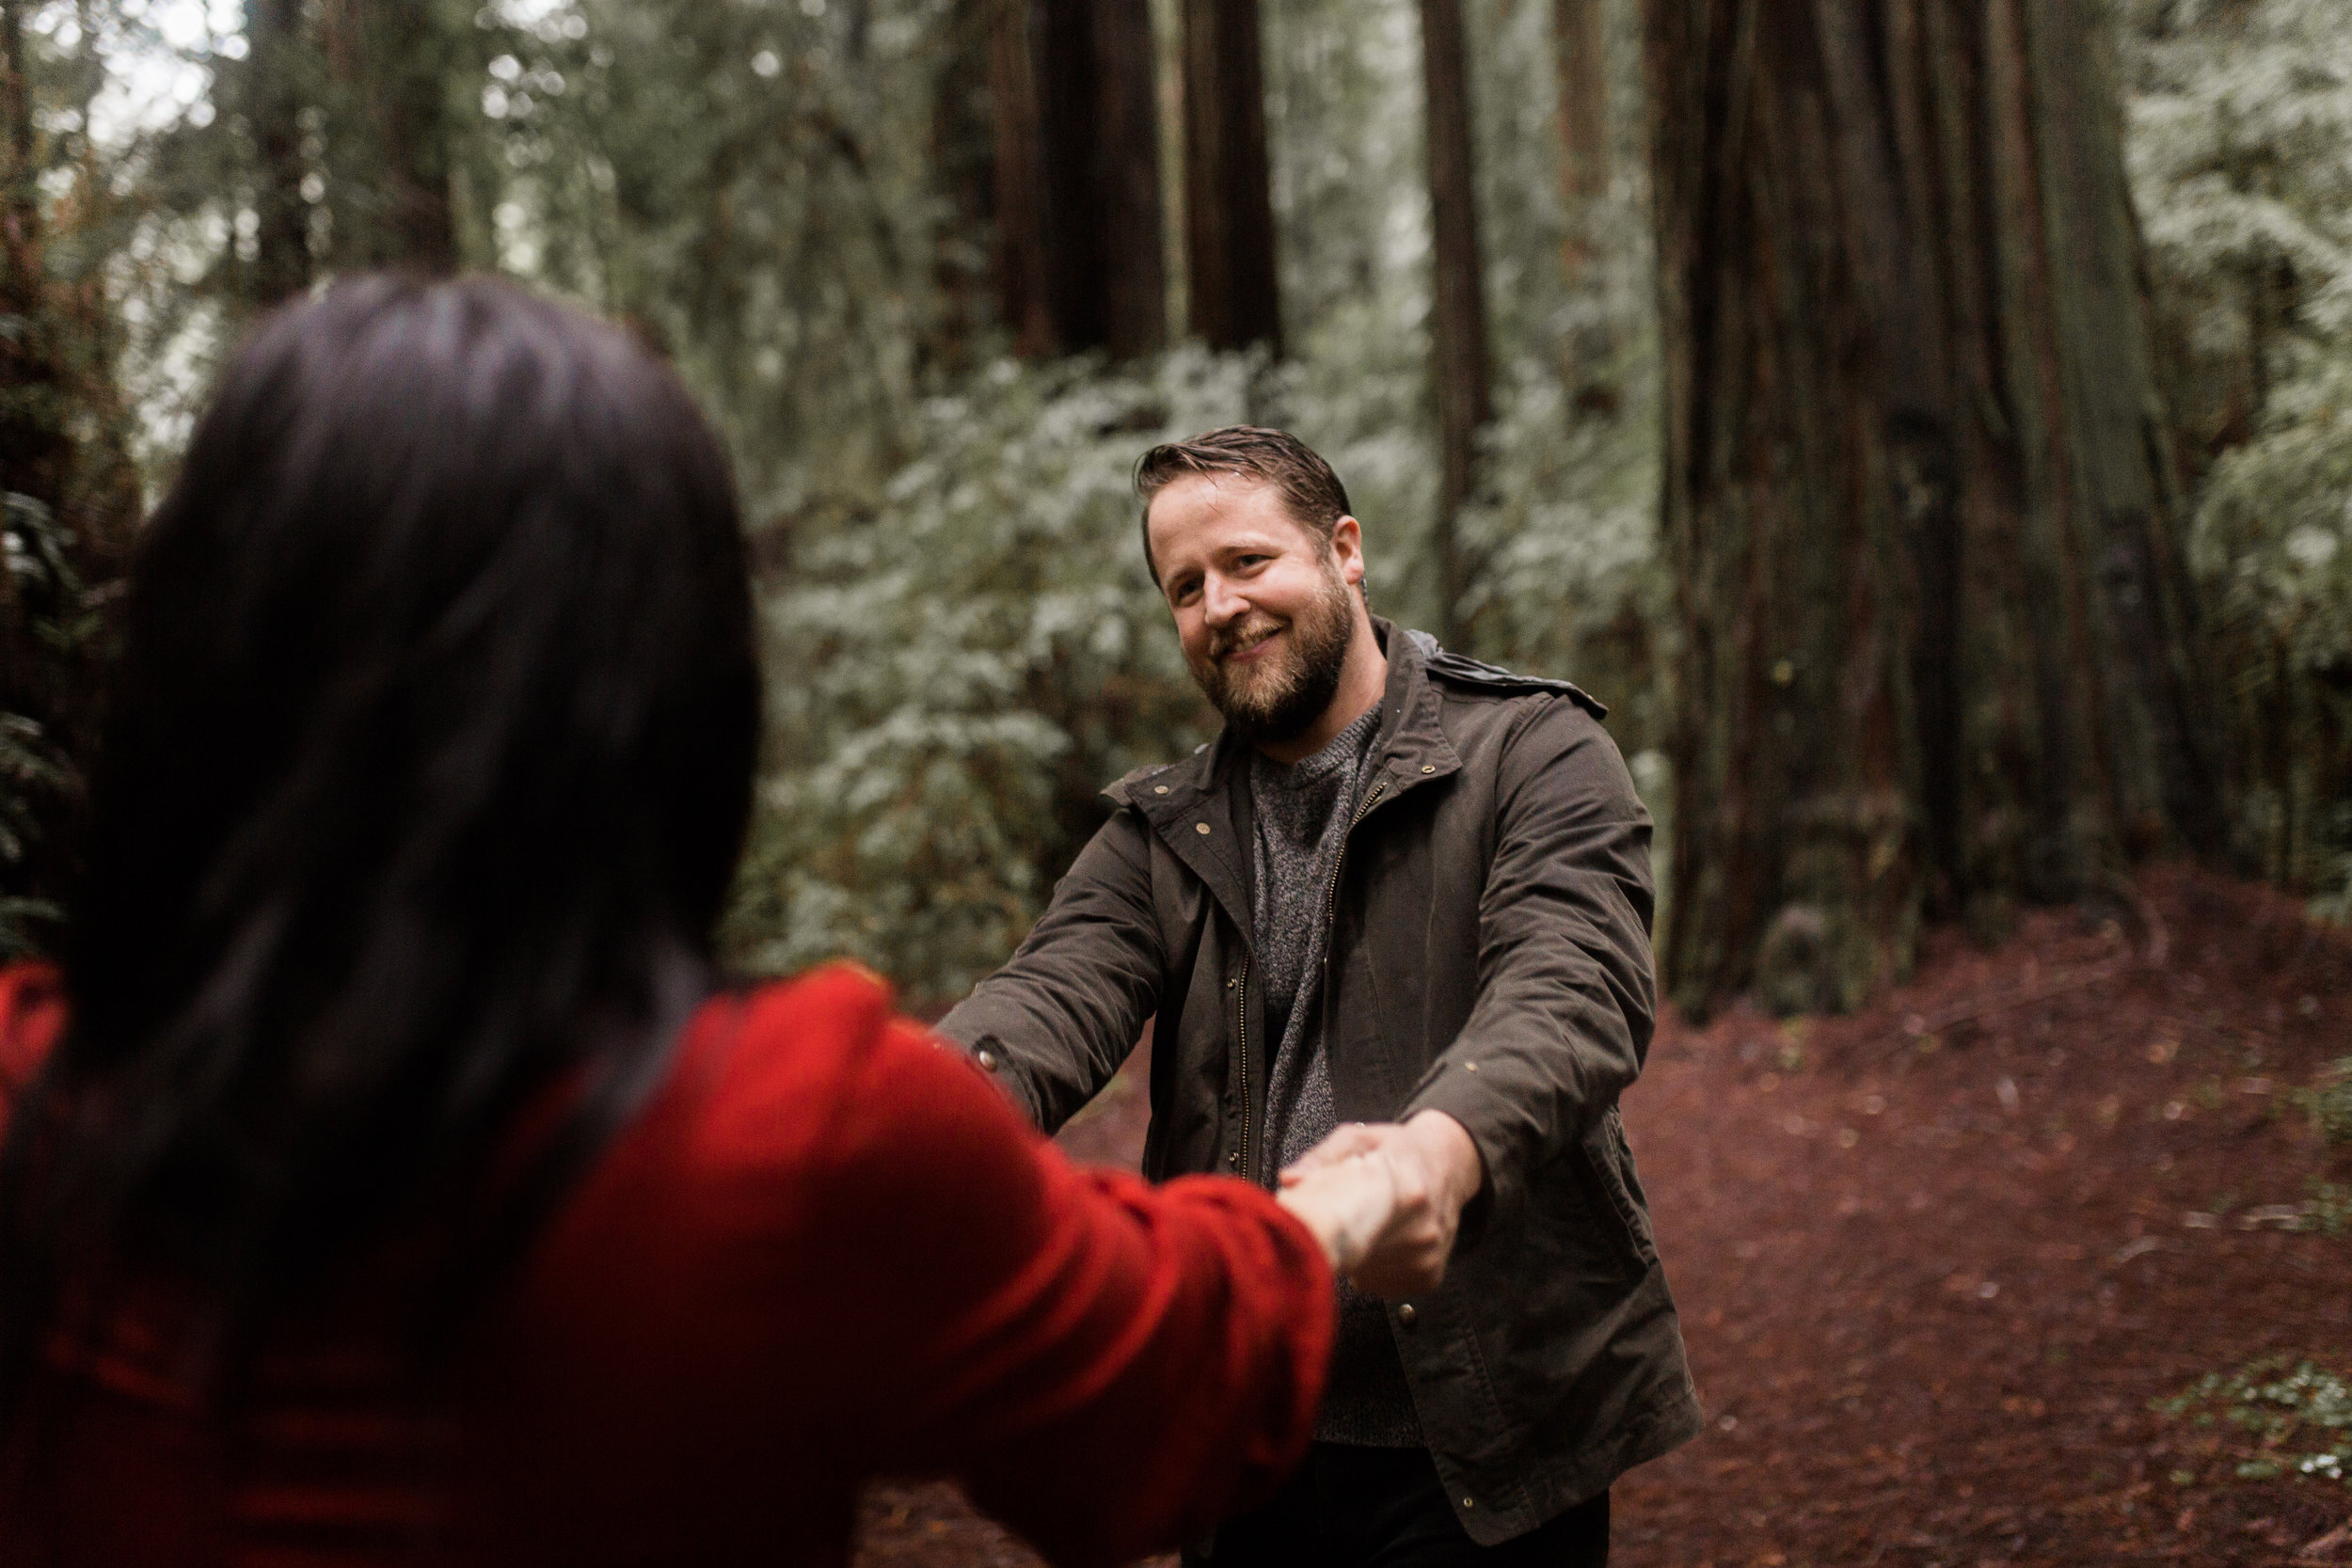 nicole-daacke-photography-redwoods-national-park-forest-rainy-foggy-adventure-engagement-session-humboldt-county-old-growth-redwood-tree-elopement-intimate-wedding-photographer-47.jpg